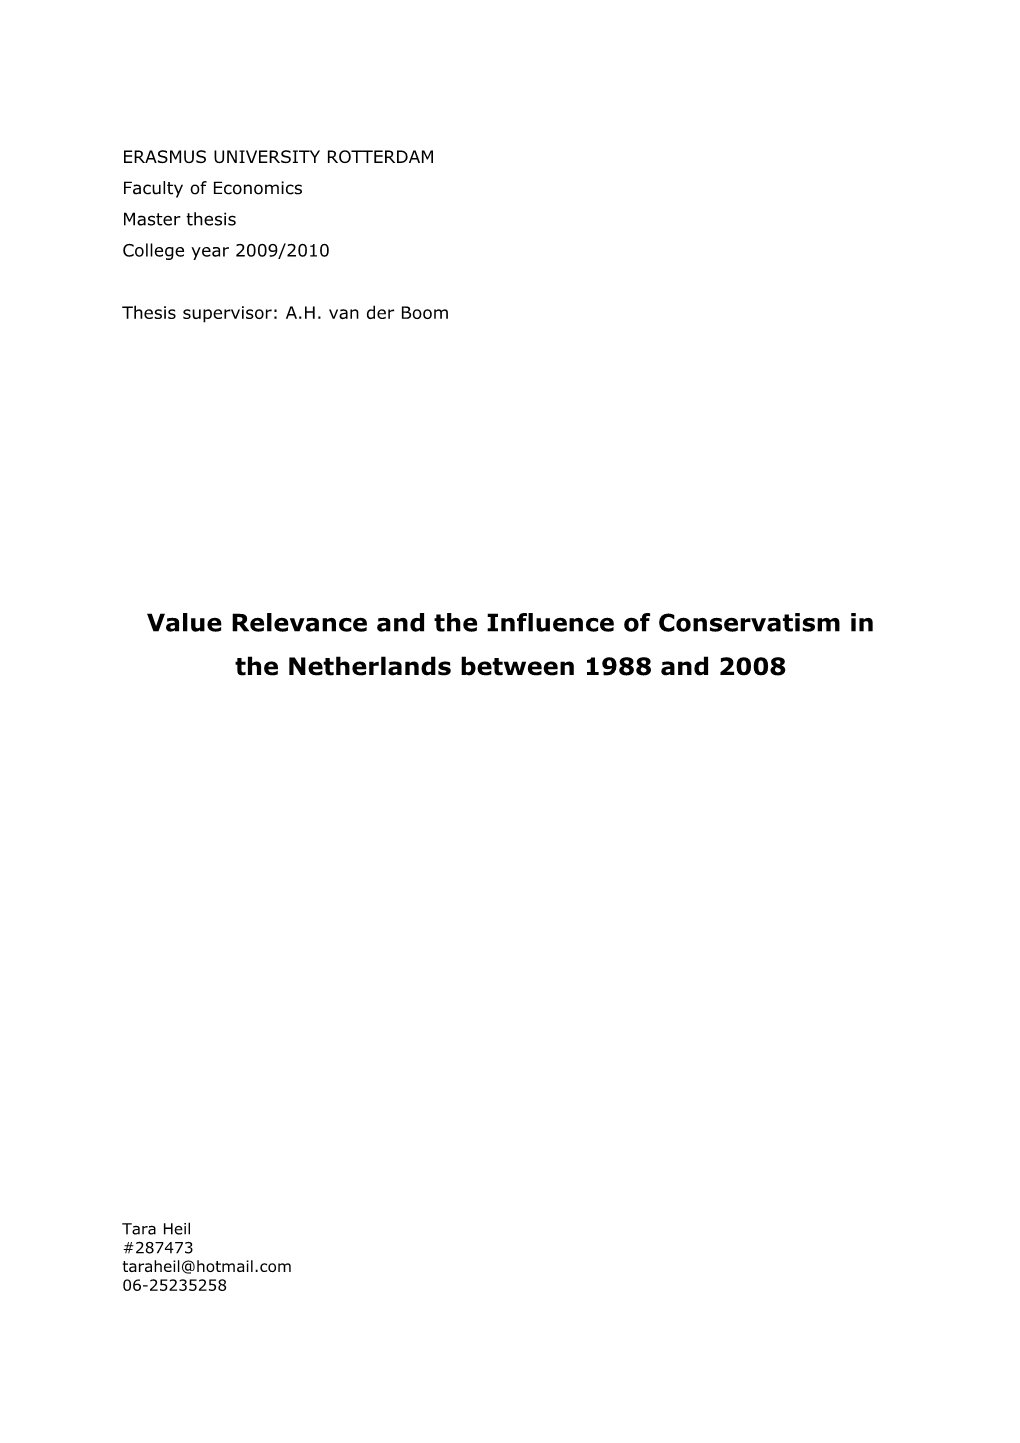 Value Relevance and the Influence of Conservatism in the Netherlands Between 1988 and 2008